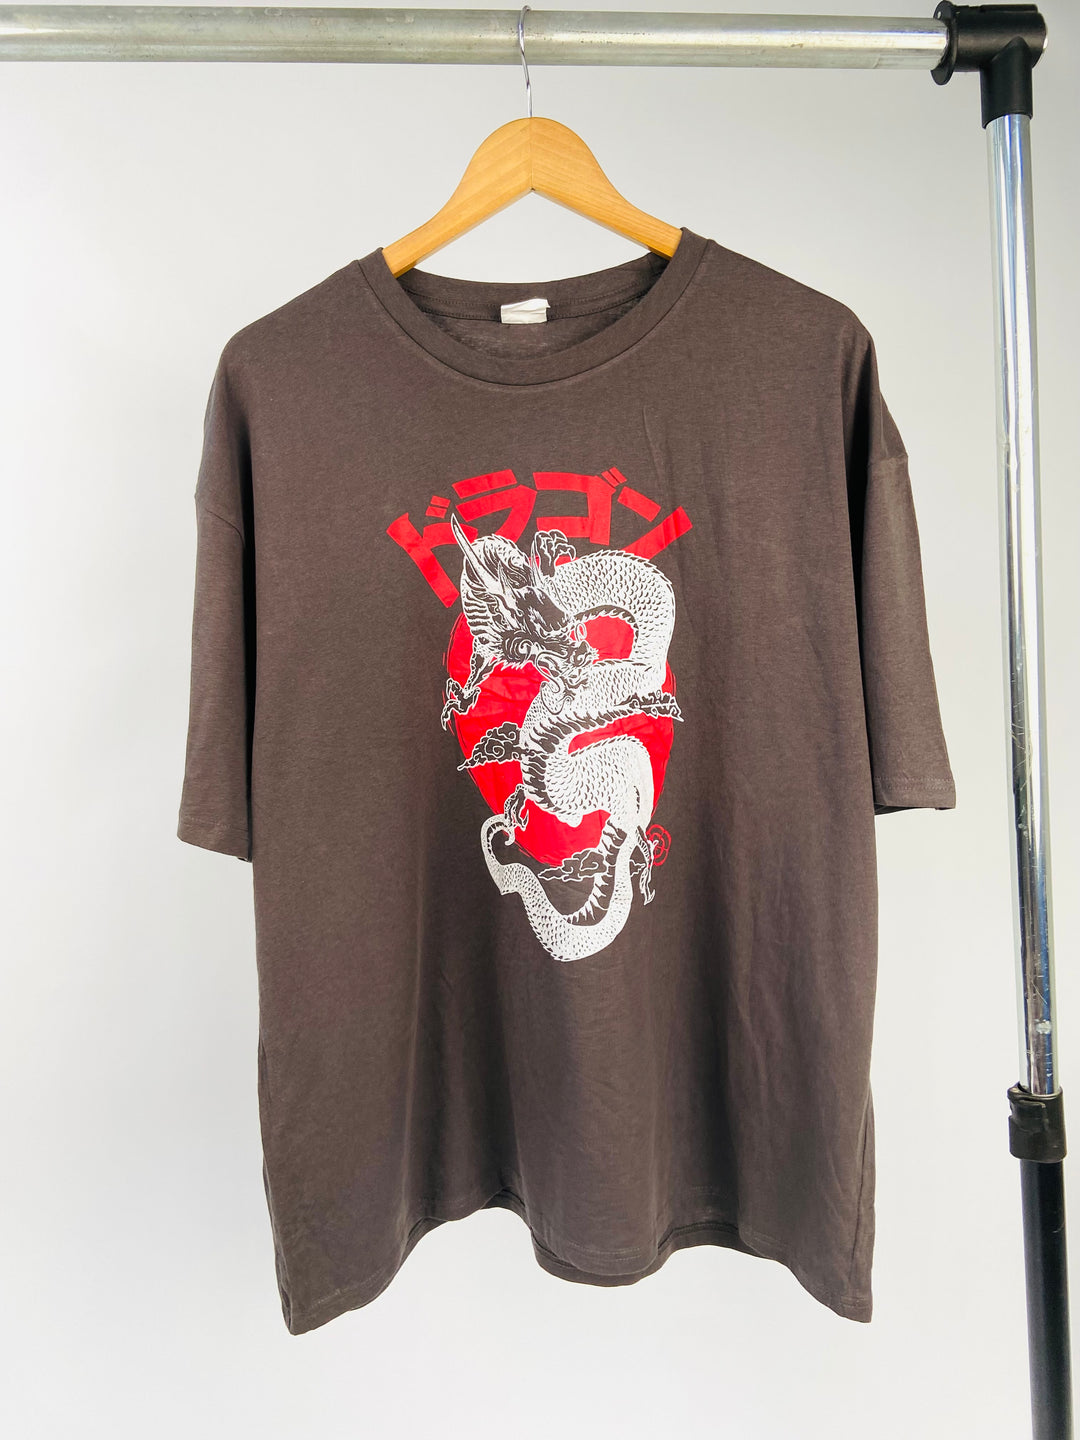 Chinese dragon t-shirt in brown